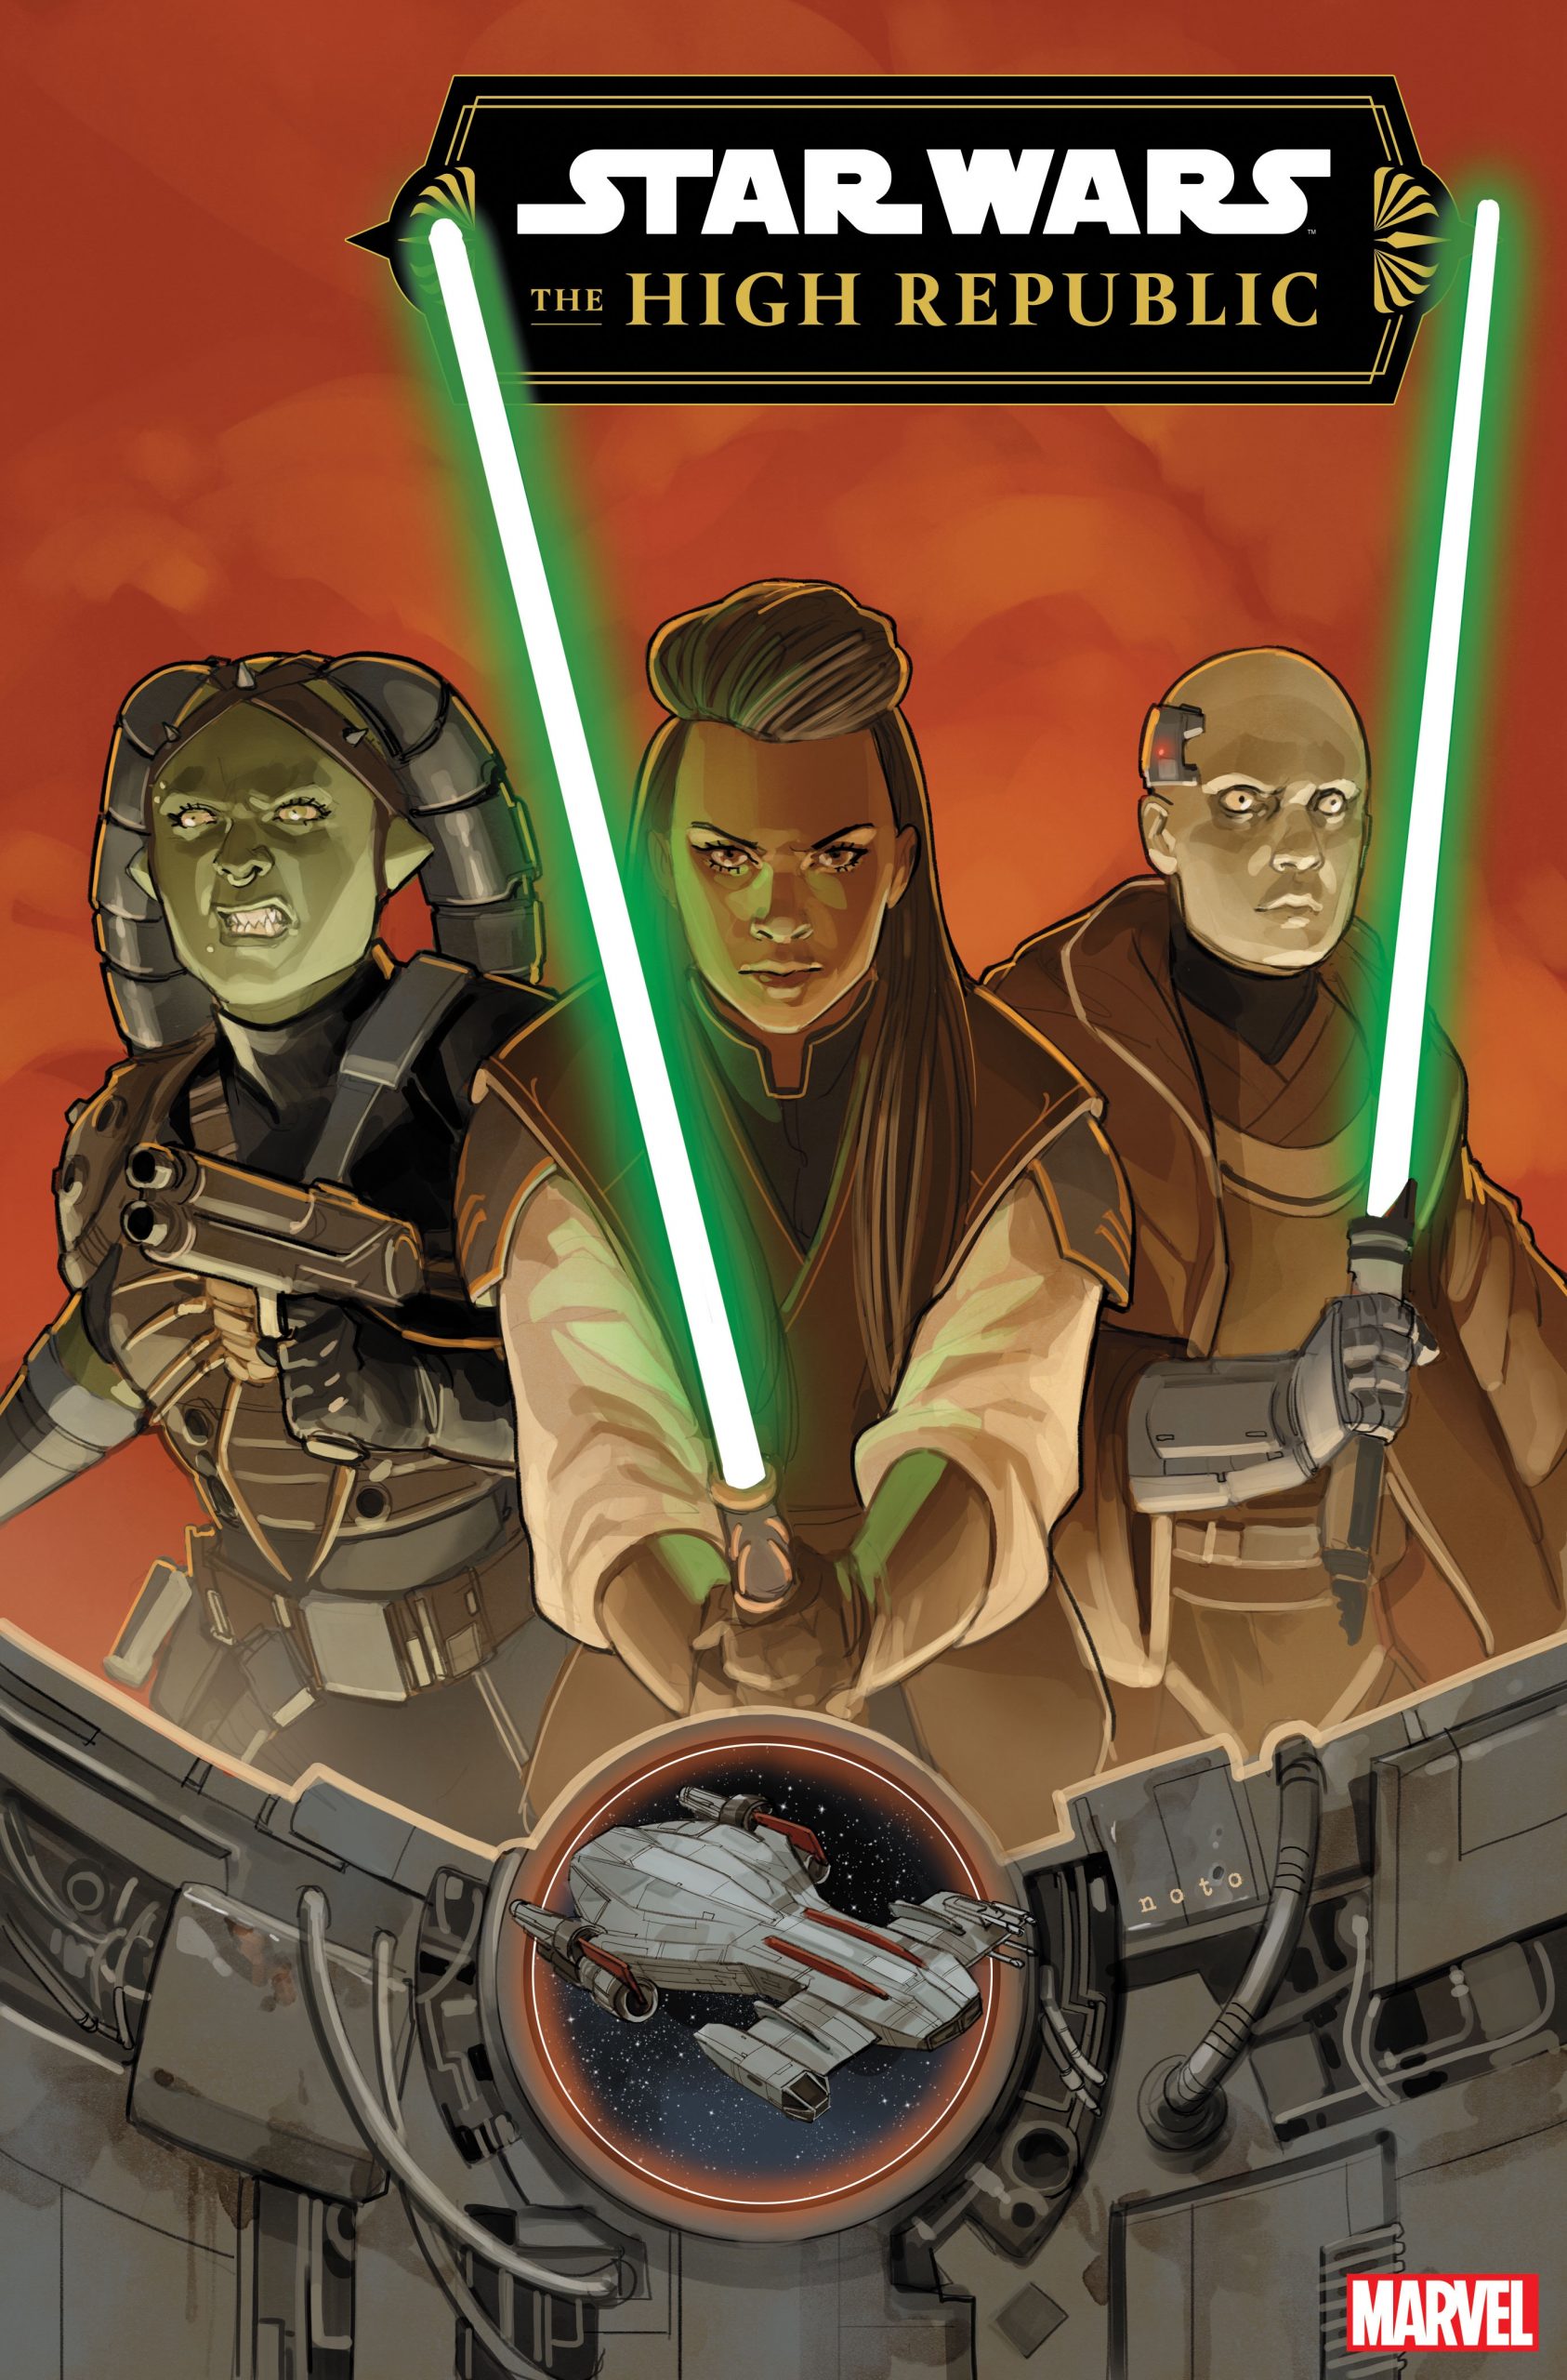 ‘<em>Star Wars: The High Republic’ gets Phase III preview</em>